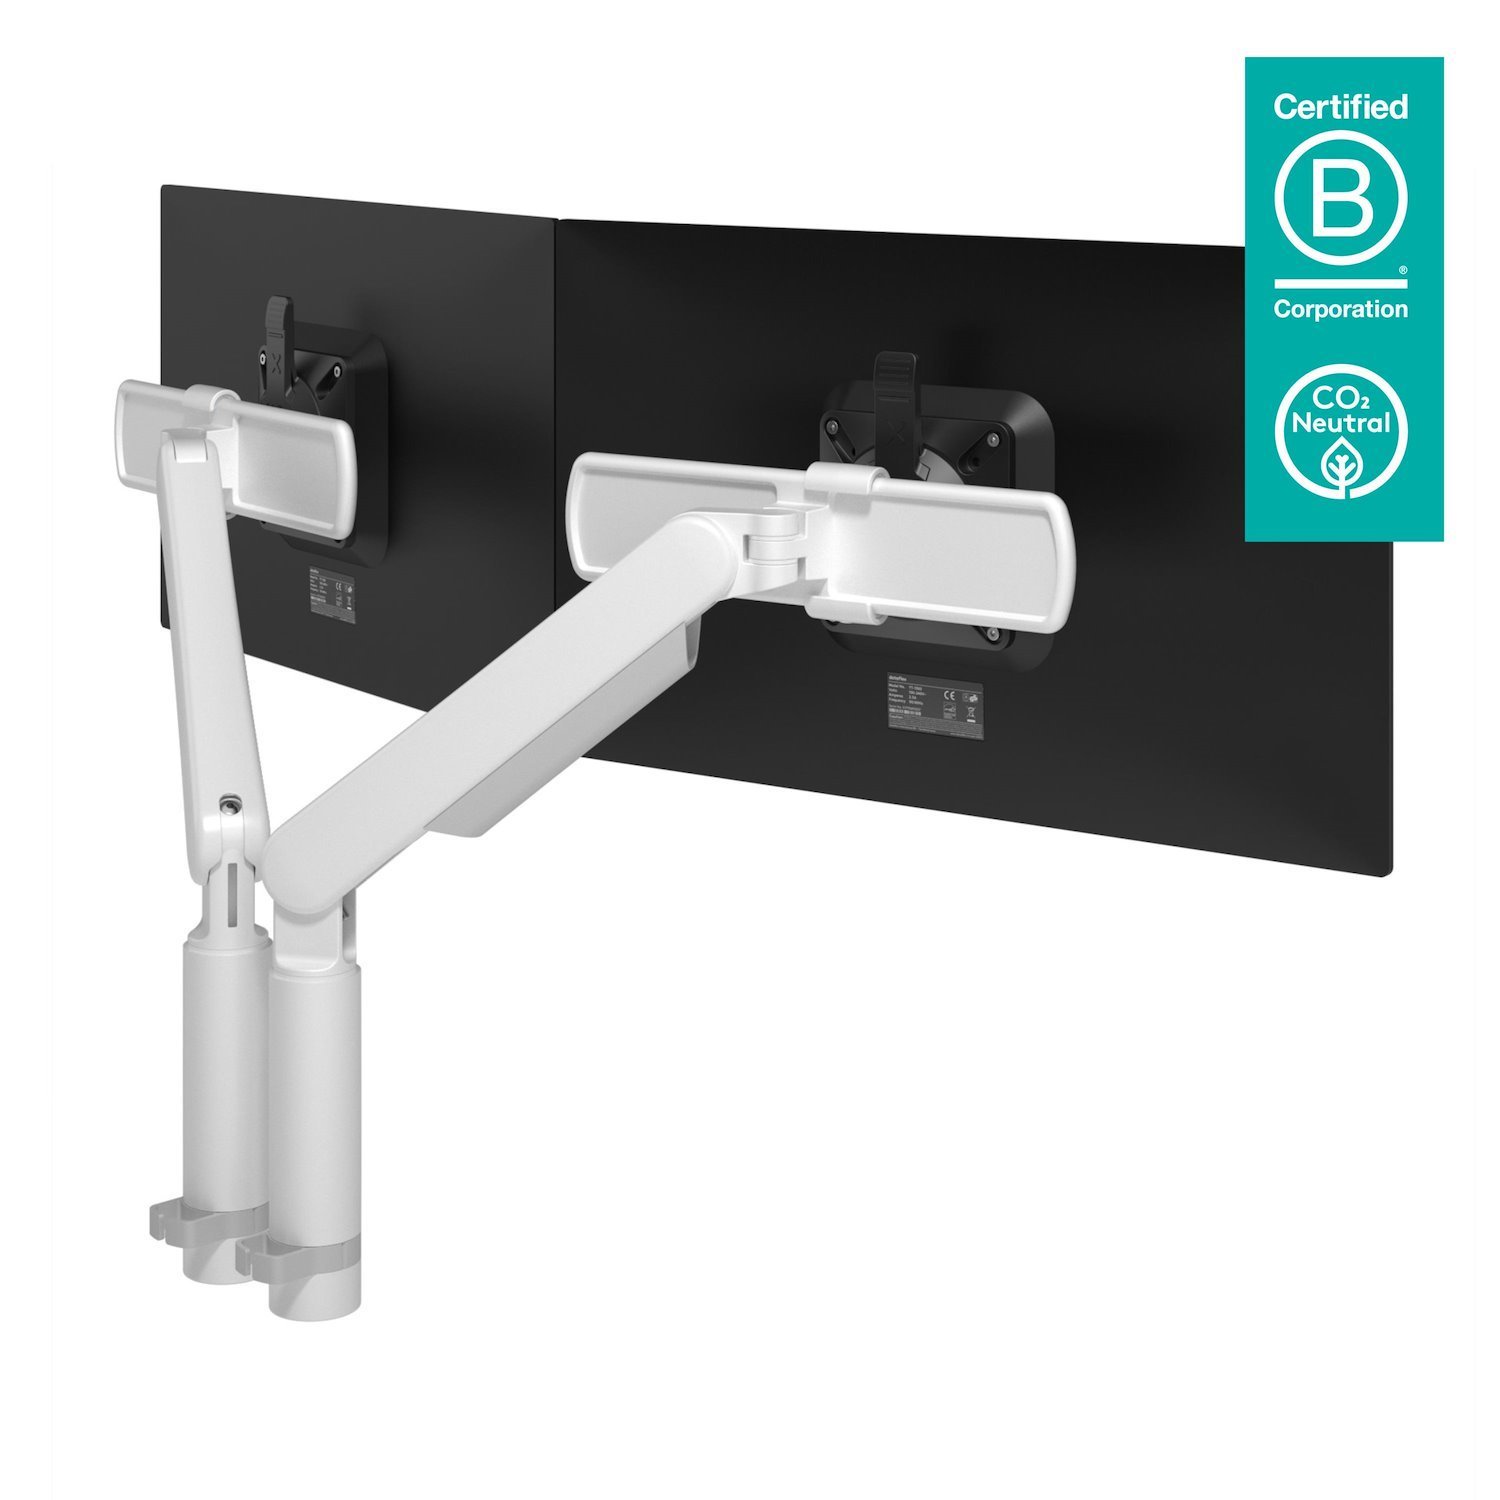 Dataflex 65.210 Monitor Mount / Stand 131.6 CM [51.8] White Desk (Dataflex Viewprime Plus Dual Monitor Arm - White - No Mount - Height And Depth Adjustment [5Years Warranty])